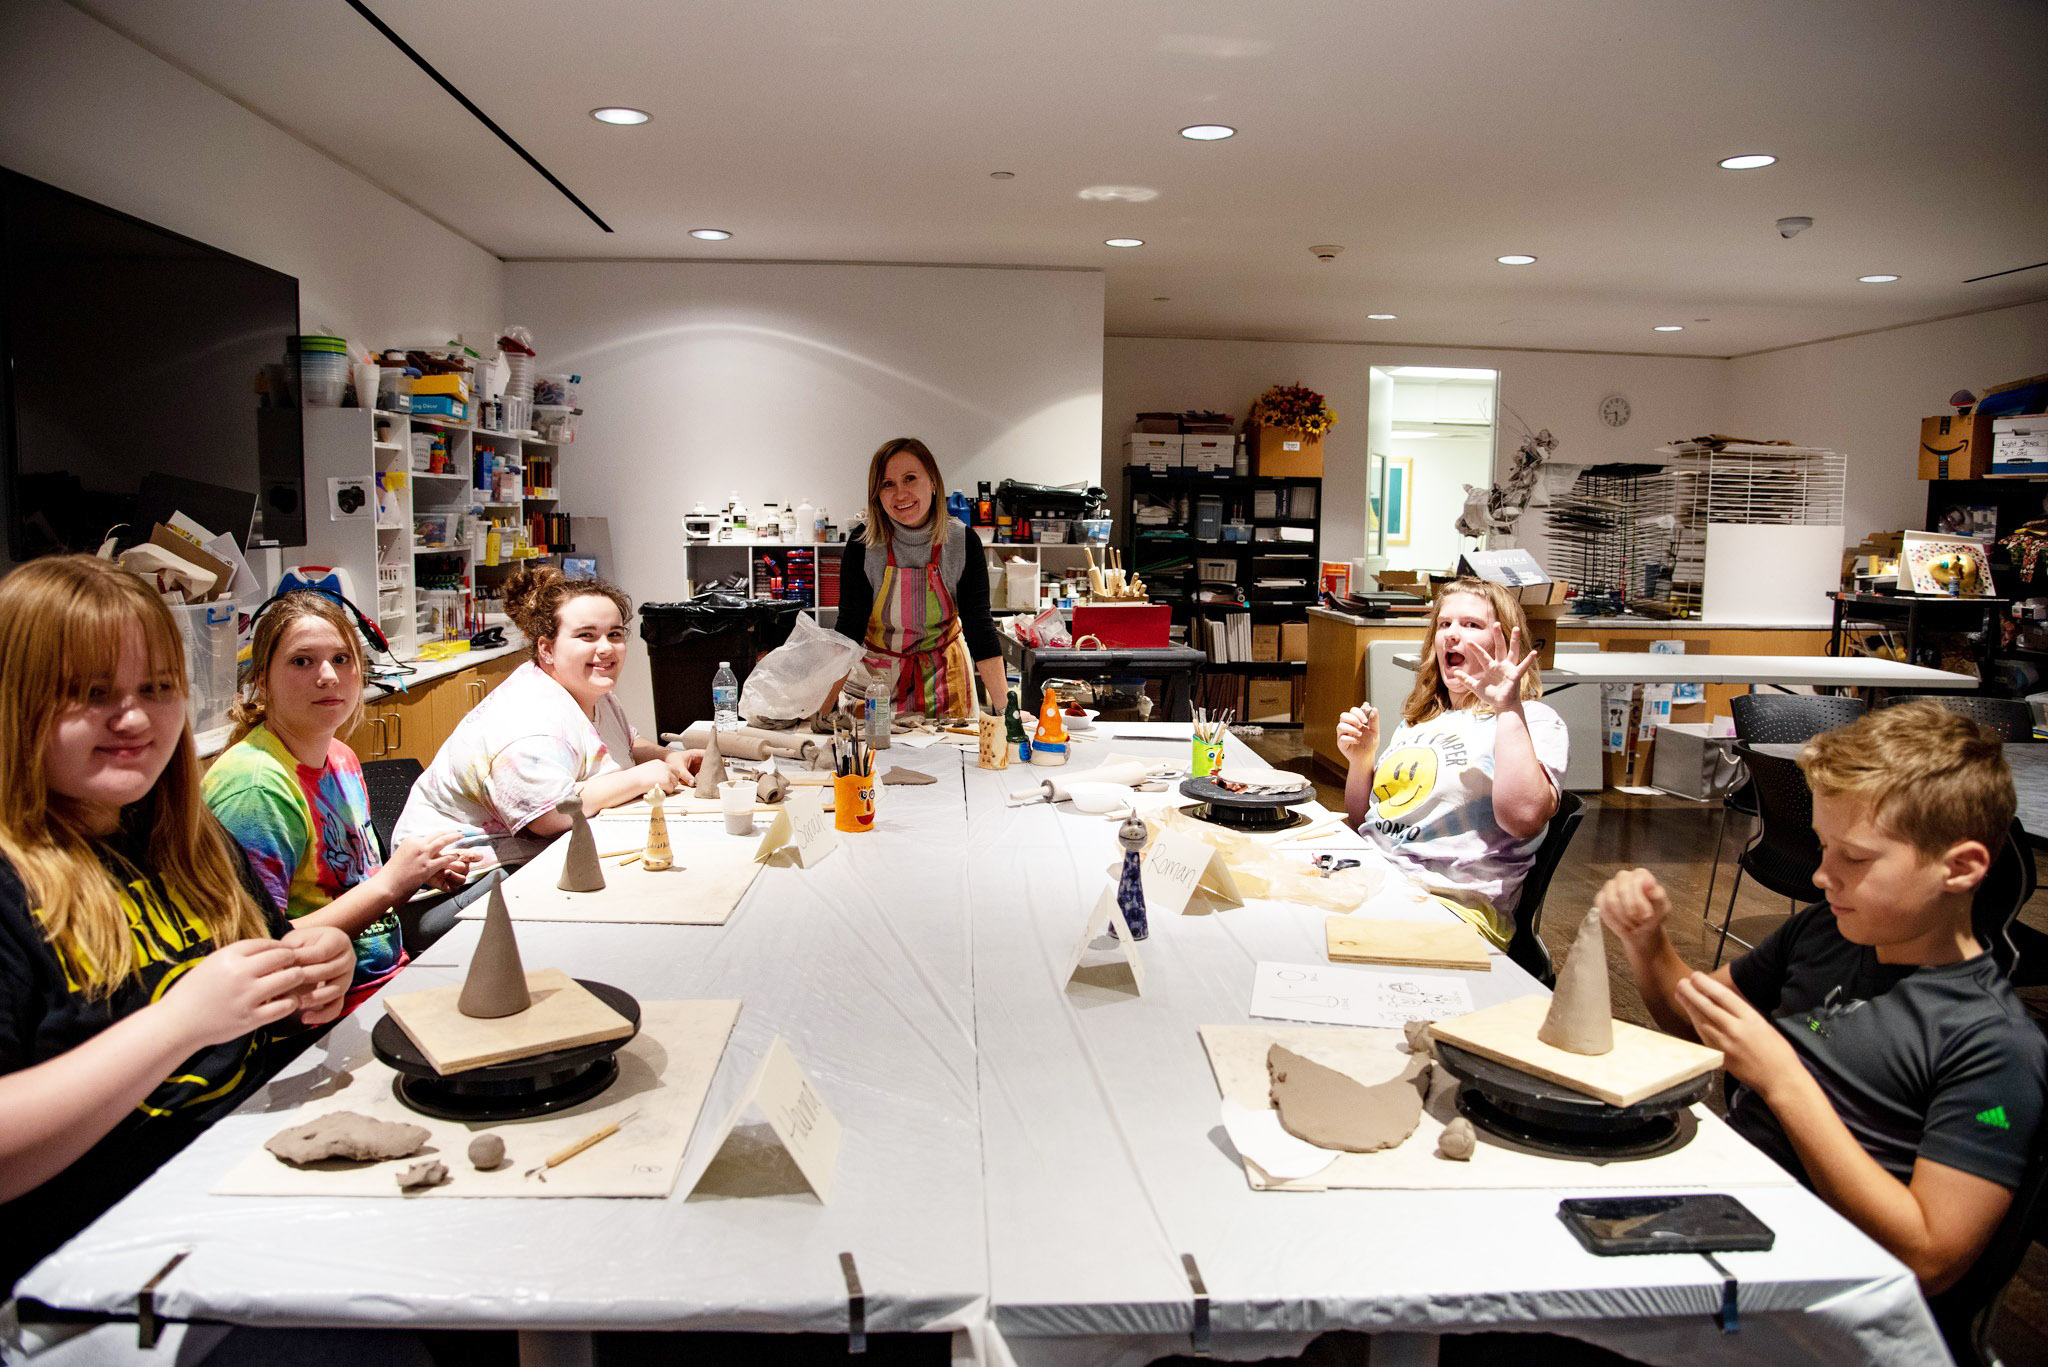 Registration for Youth and Adult Art Classes Open at Pearl Fincher MFA in Spring